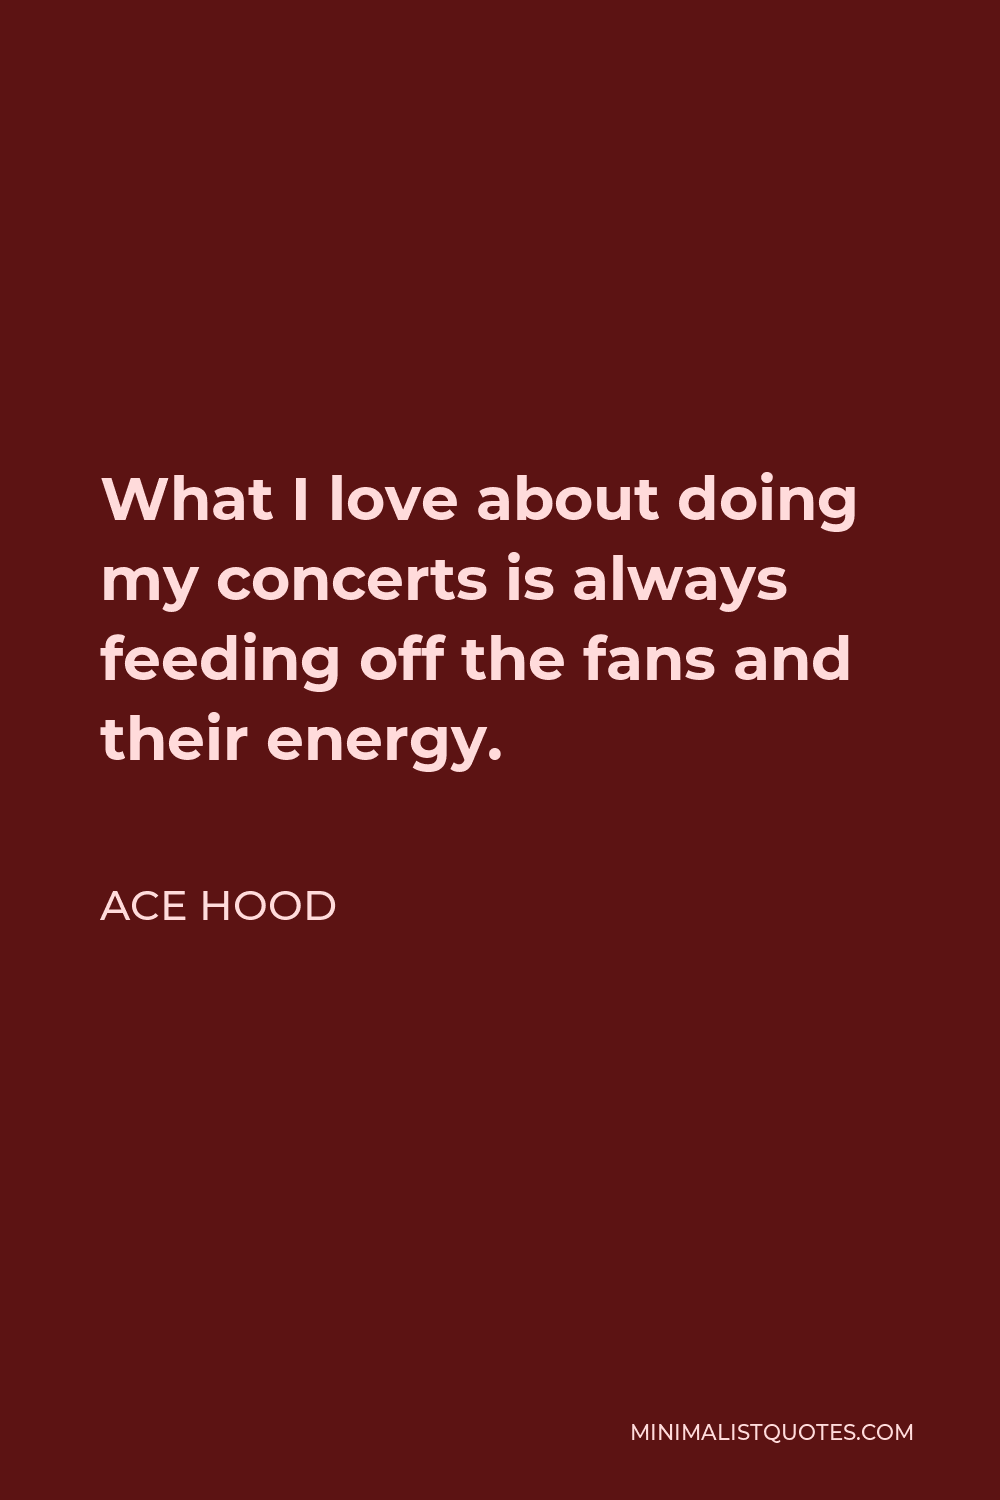 Ace Hood Quote - What I love about doing my concerts is always feeding off the fans and their energy.